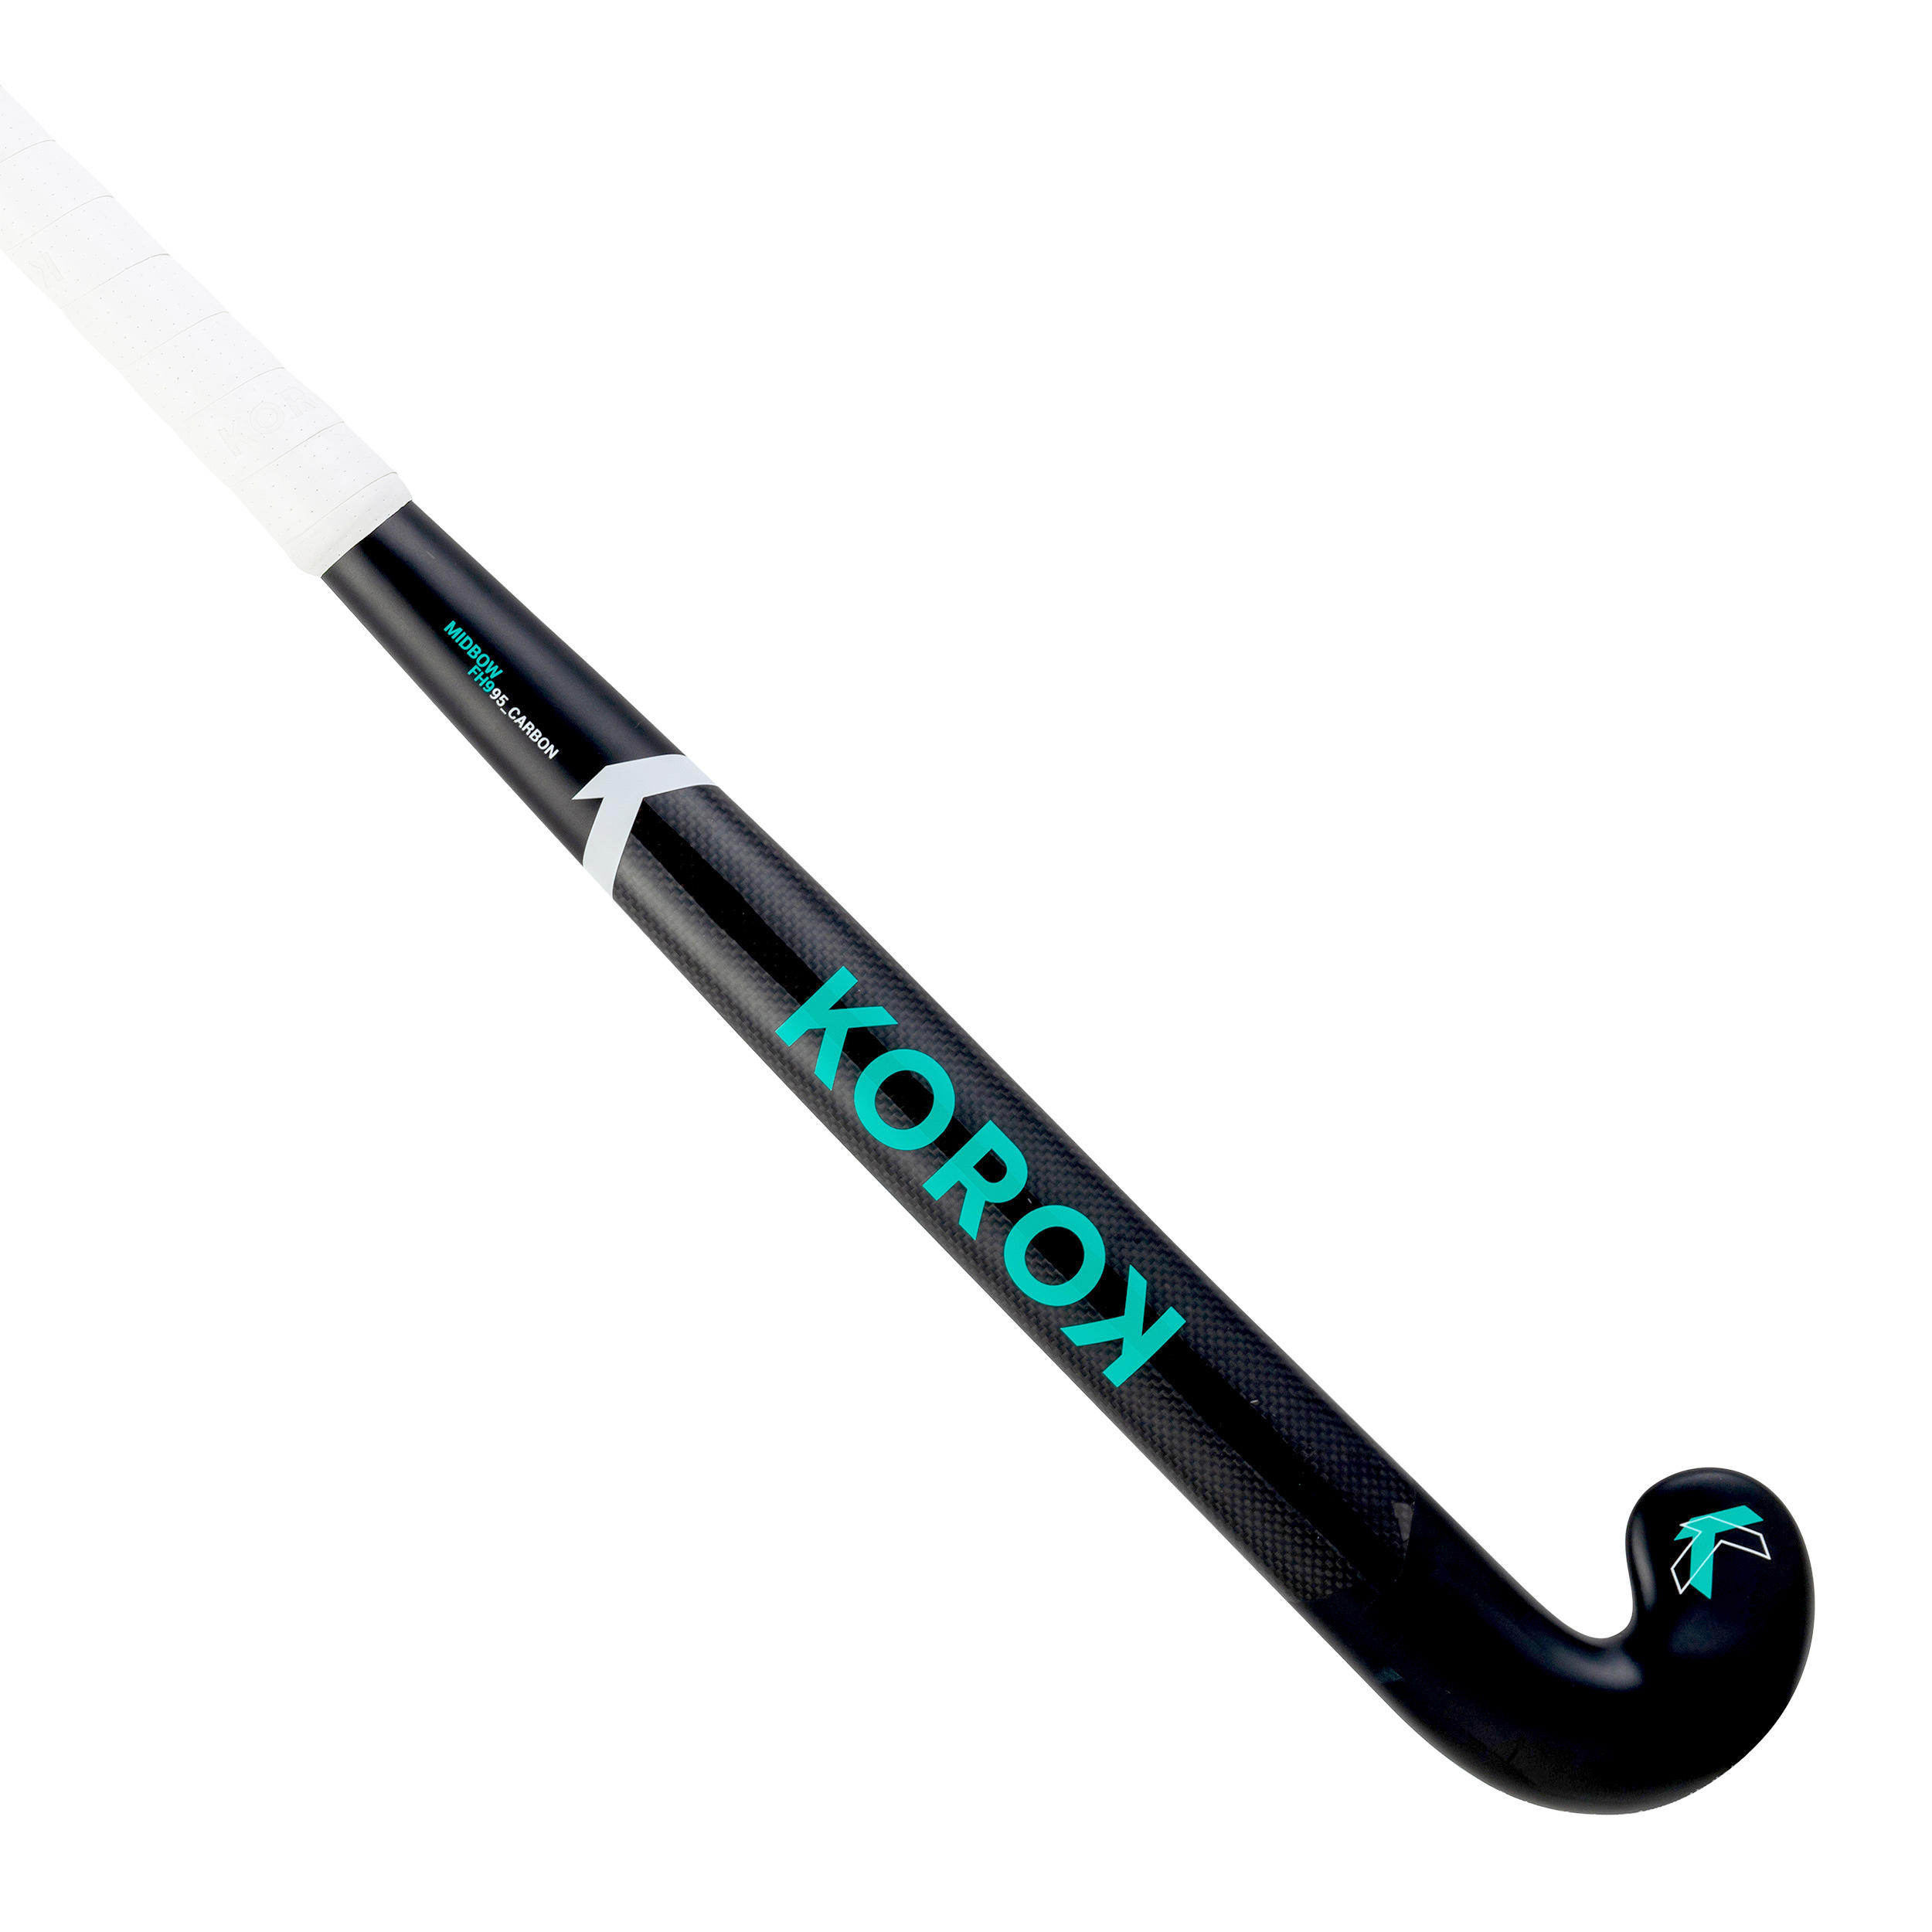 Adult Advanced Field Hockey 95% Carbon Mid Bow Stick FH995 - Black/Turquoise 1/12